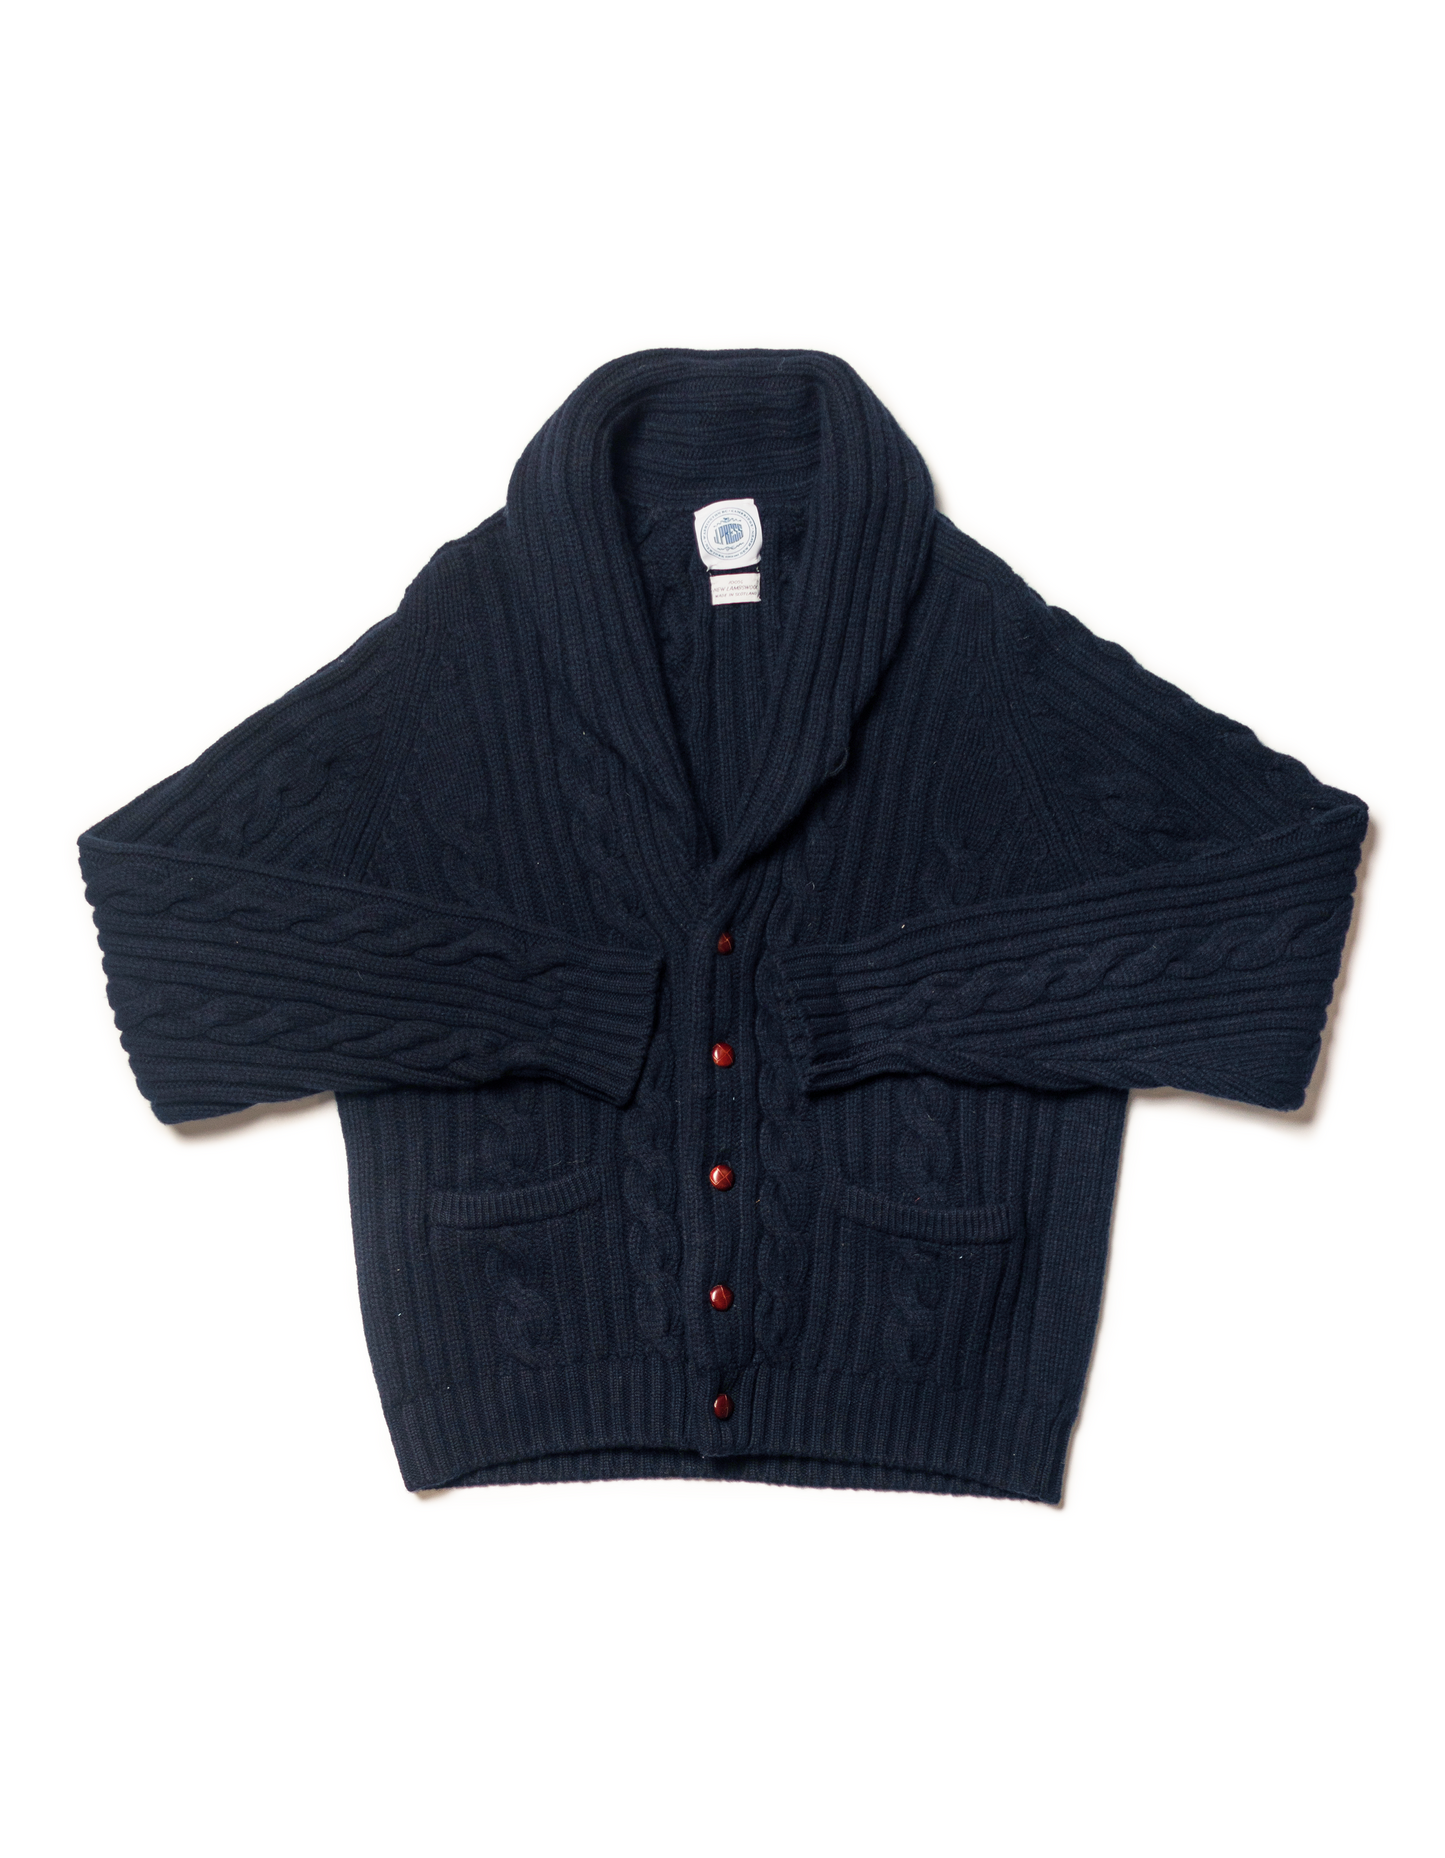 NAVY LAMBSWOOL CABLE CARDIGAN